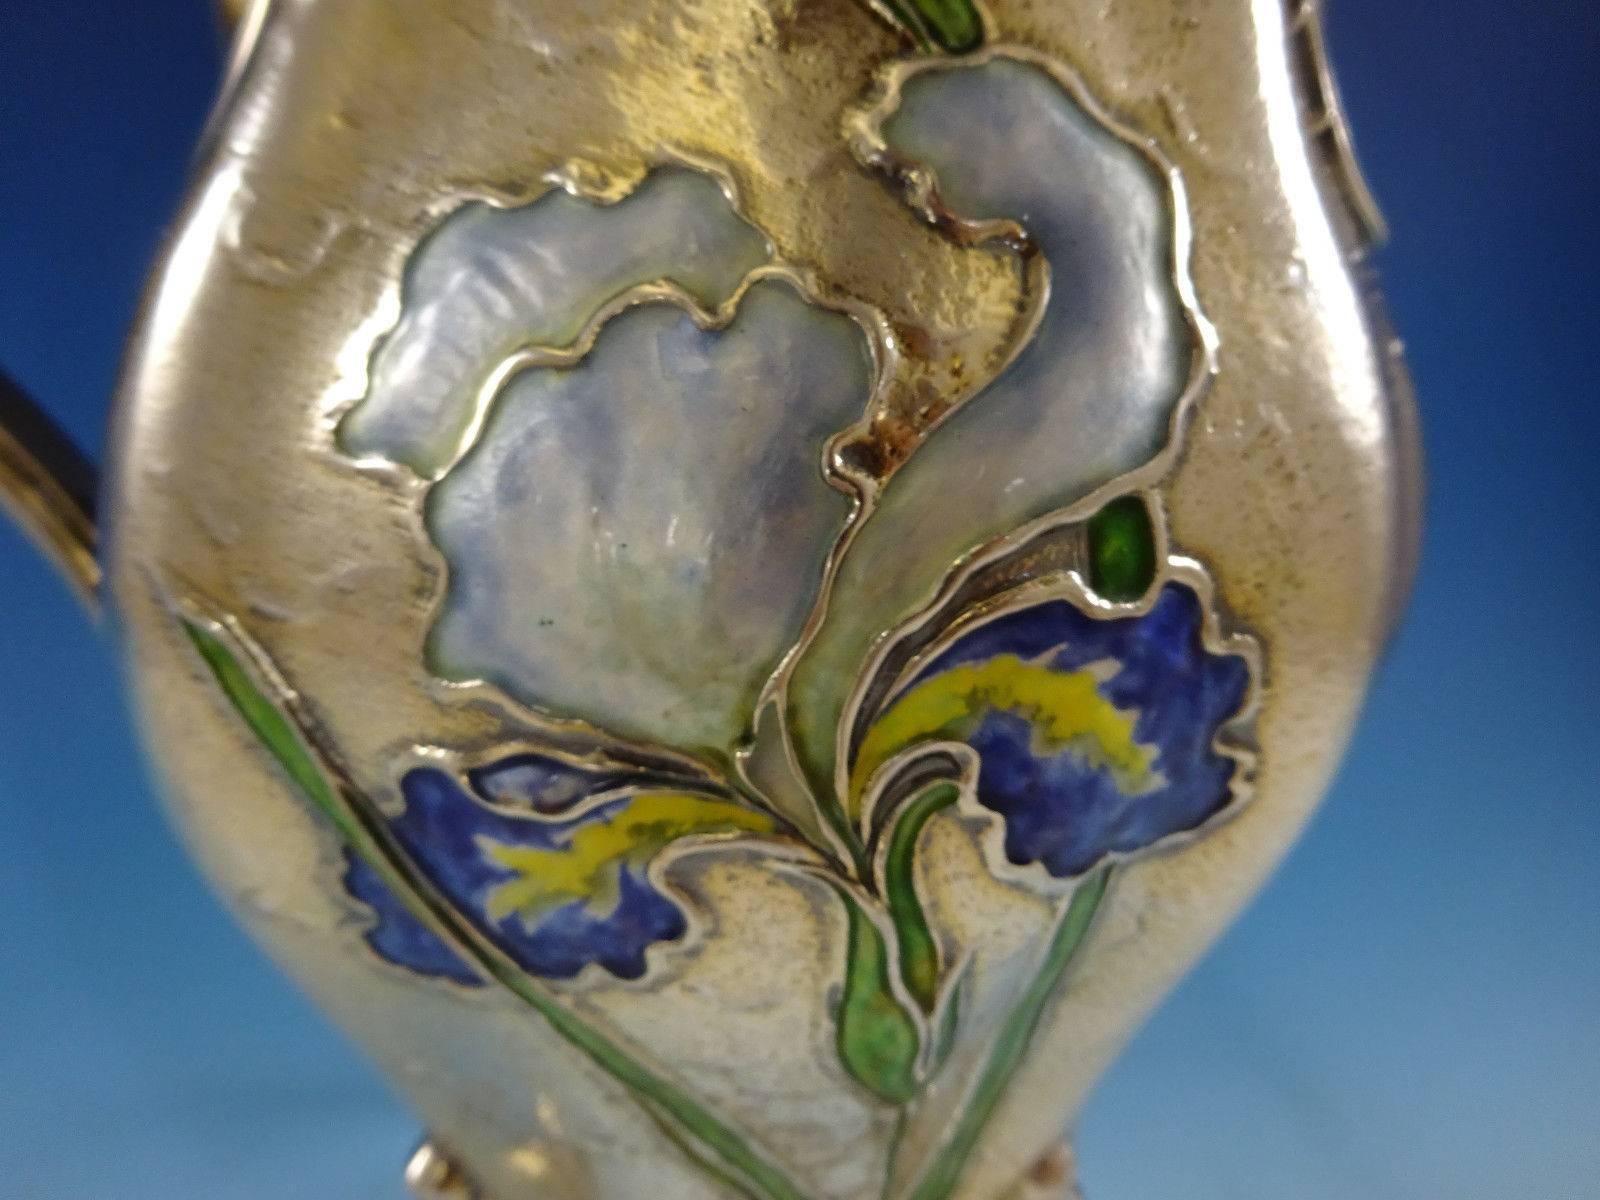 19th Century Gorham Enameled Rare Sterling Silver Water Pitcher with Iris, Dated 1897 Antique